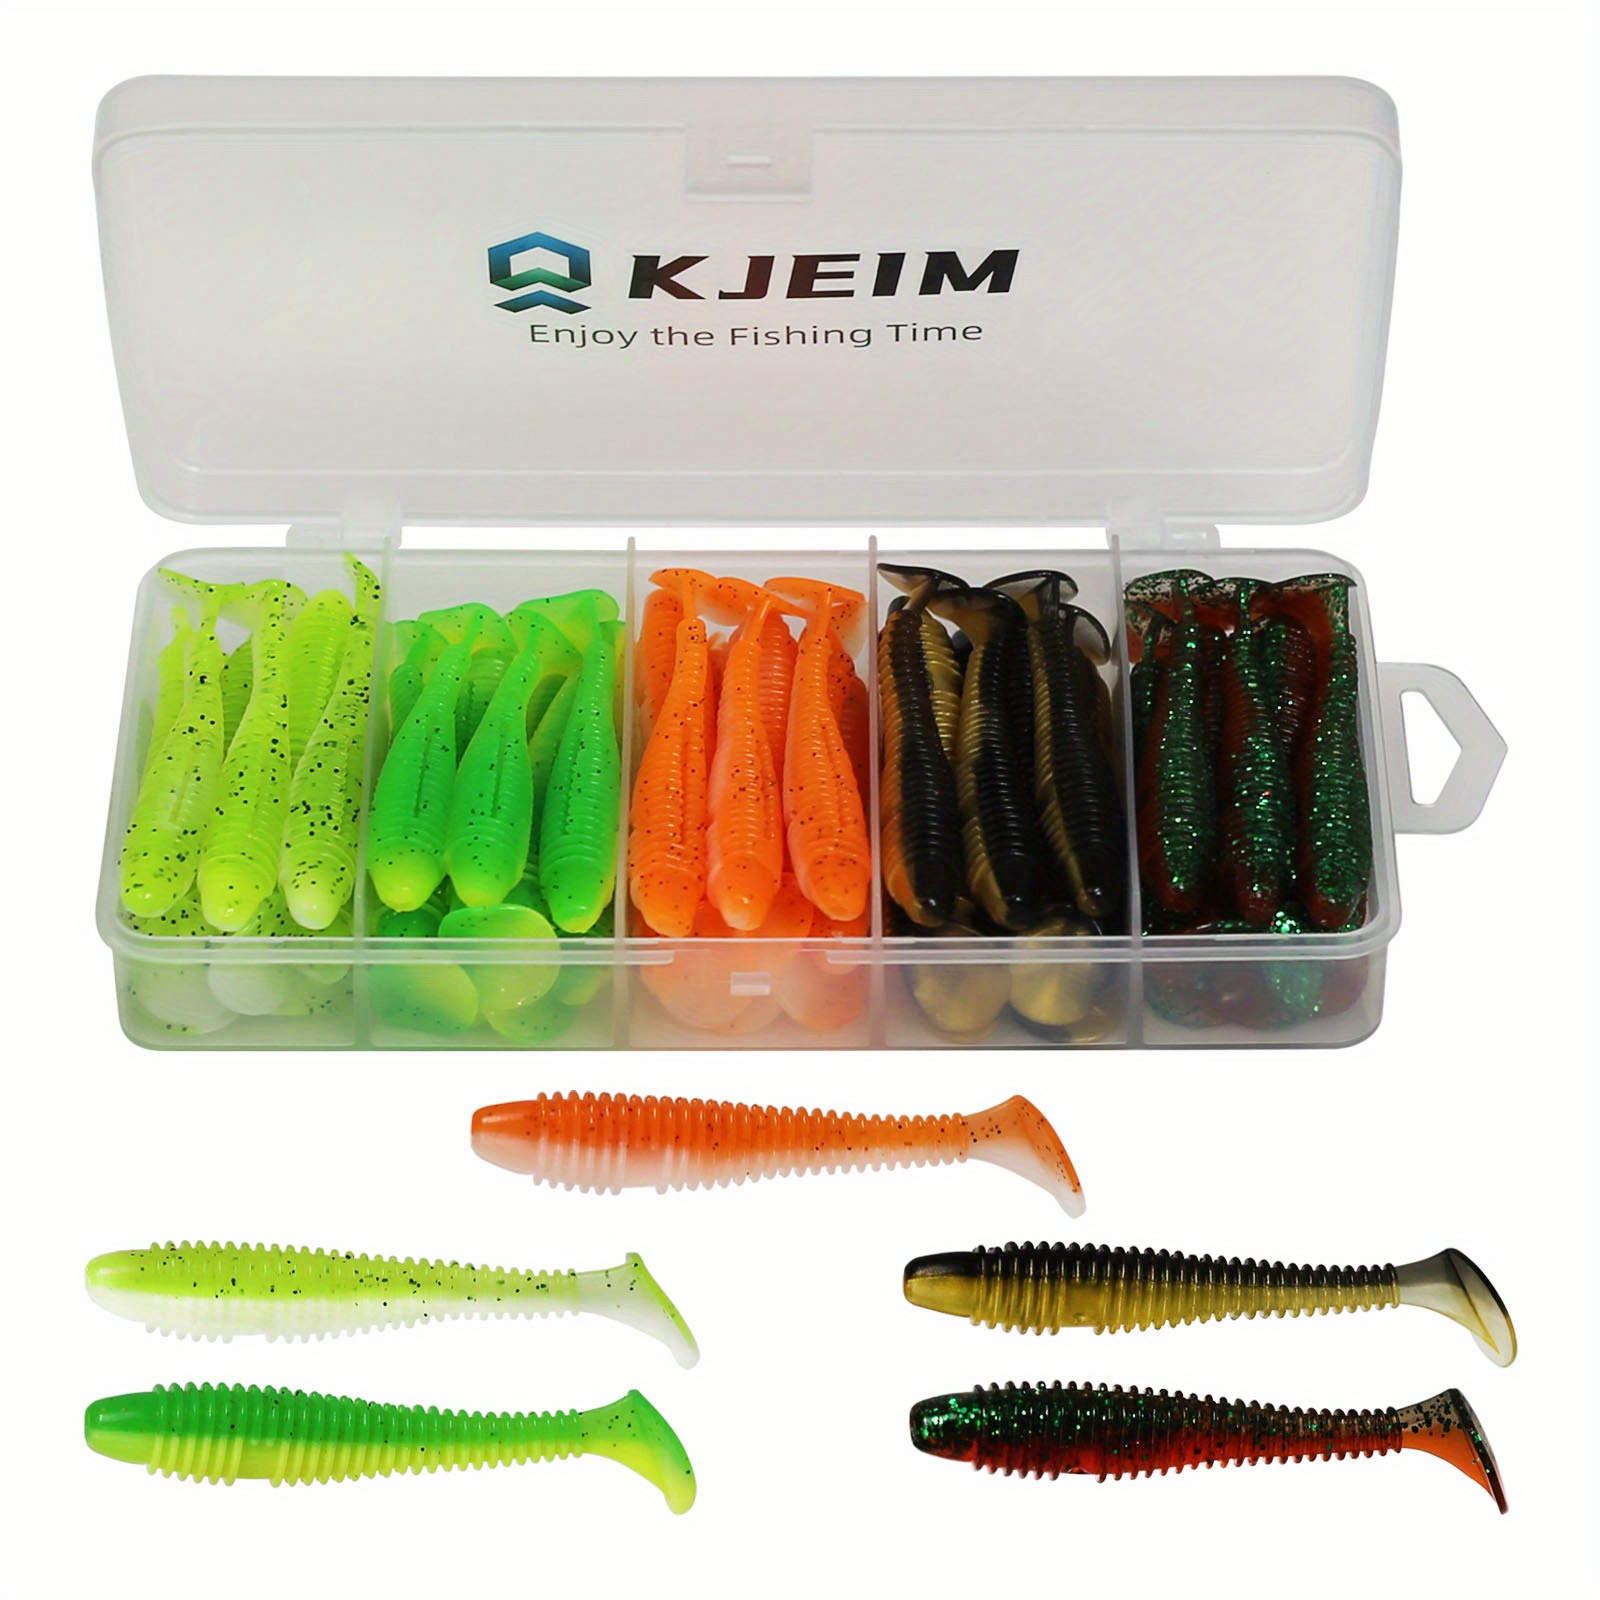 50pcs Soft Fishing Lures, Soft Plastic Baits Kit with Box for Freshwater &  Saltwater Gear, T Tail Bait Artificial Worm Swimbait for Bass Trout Redfish